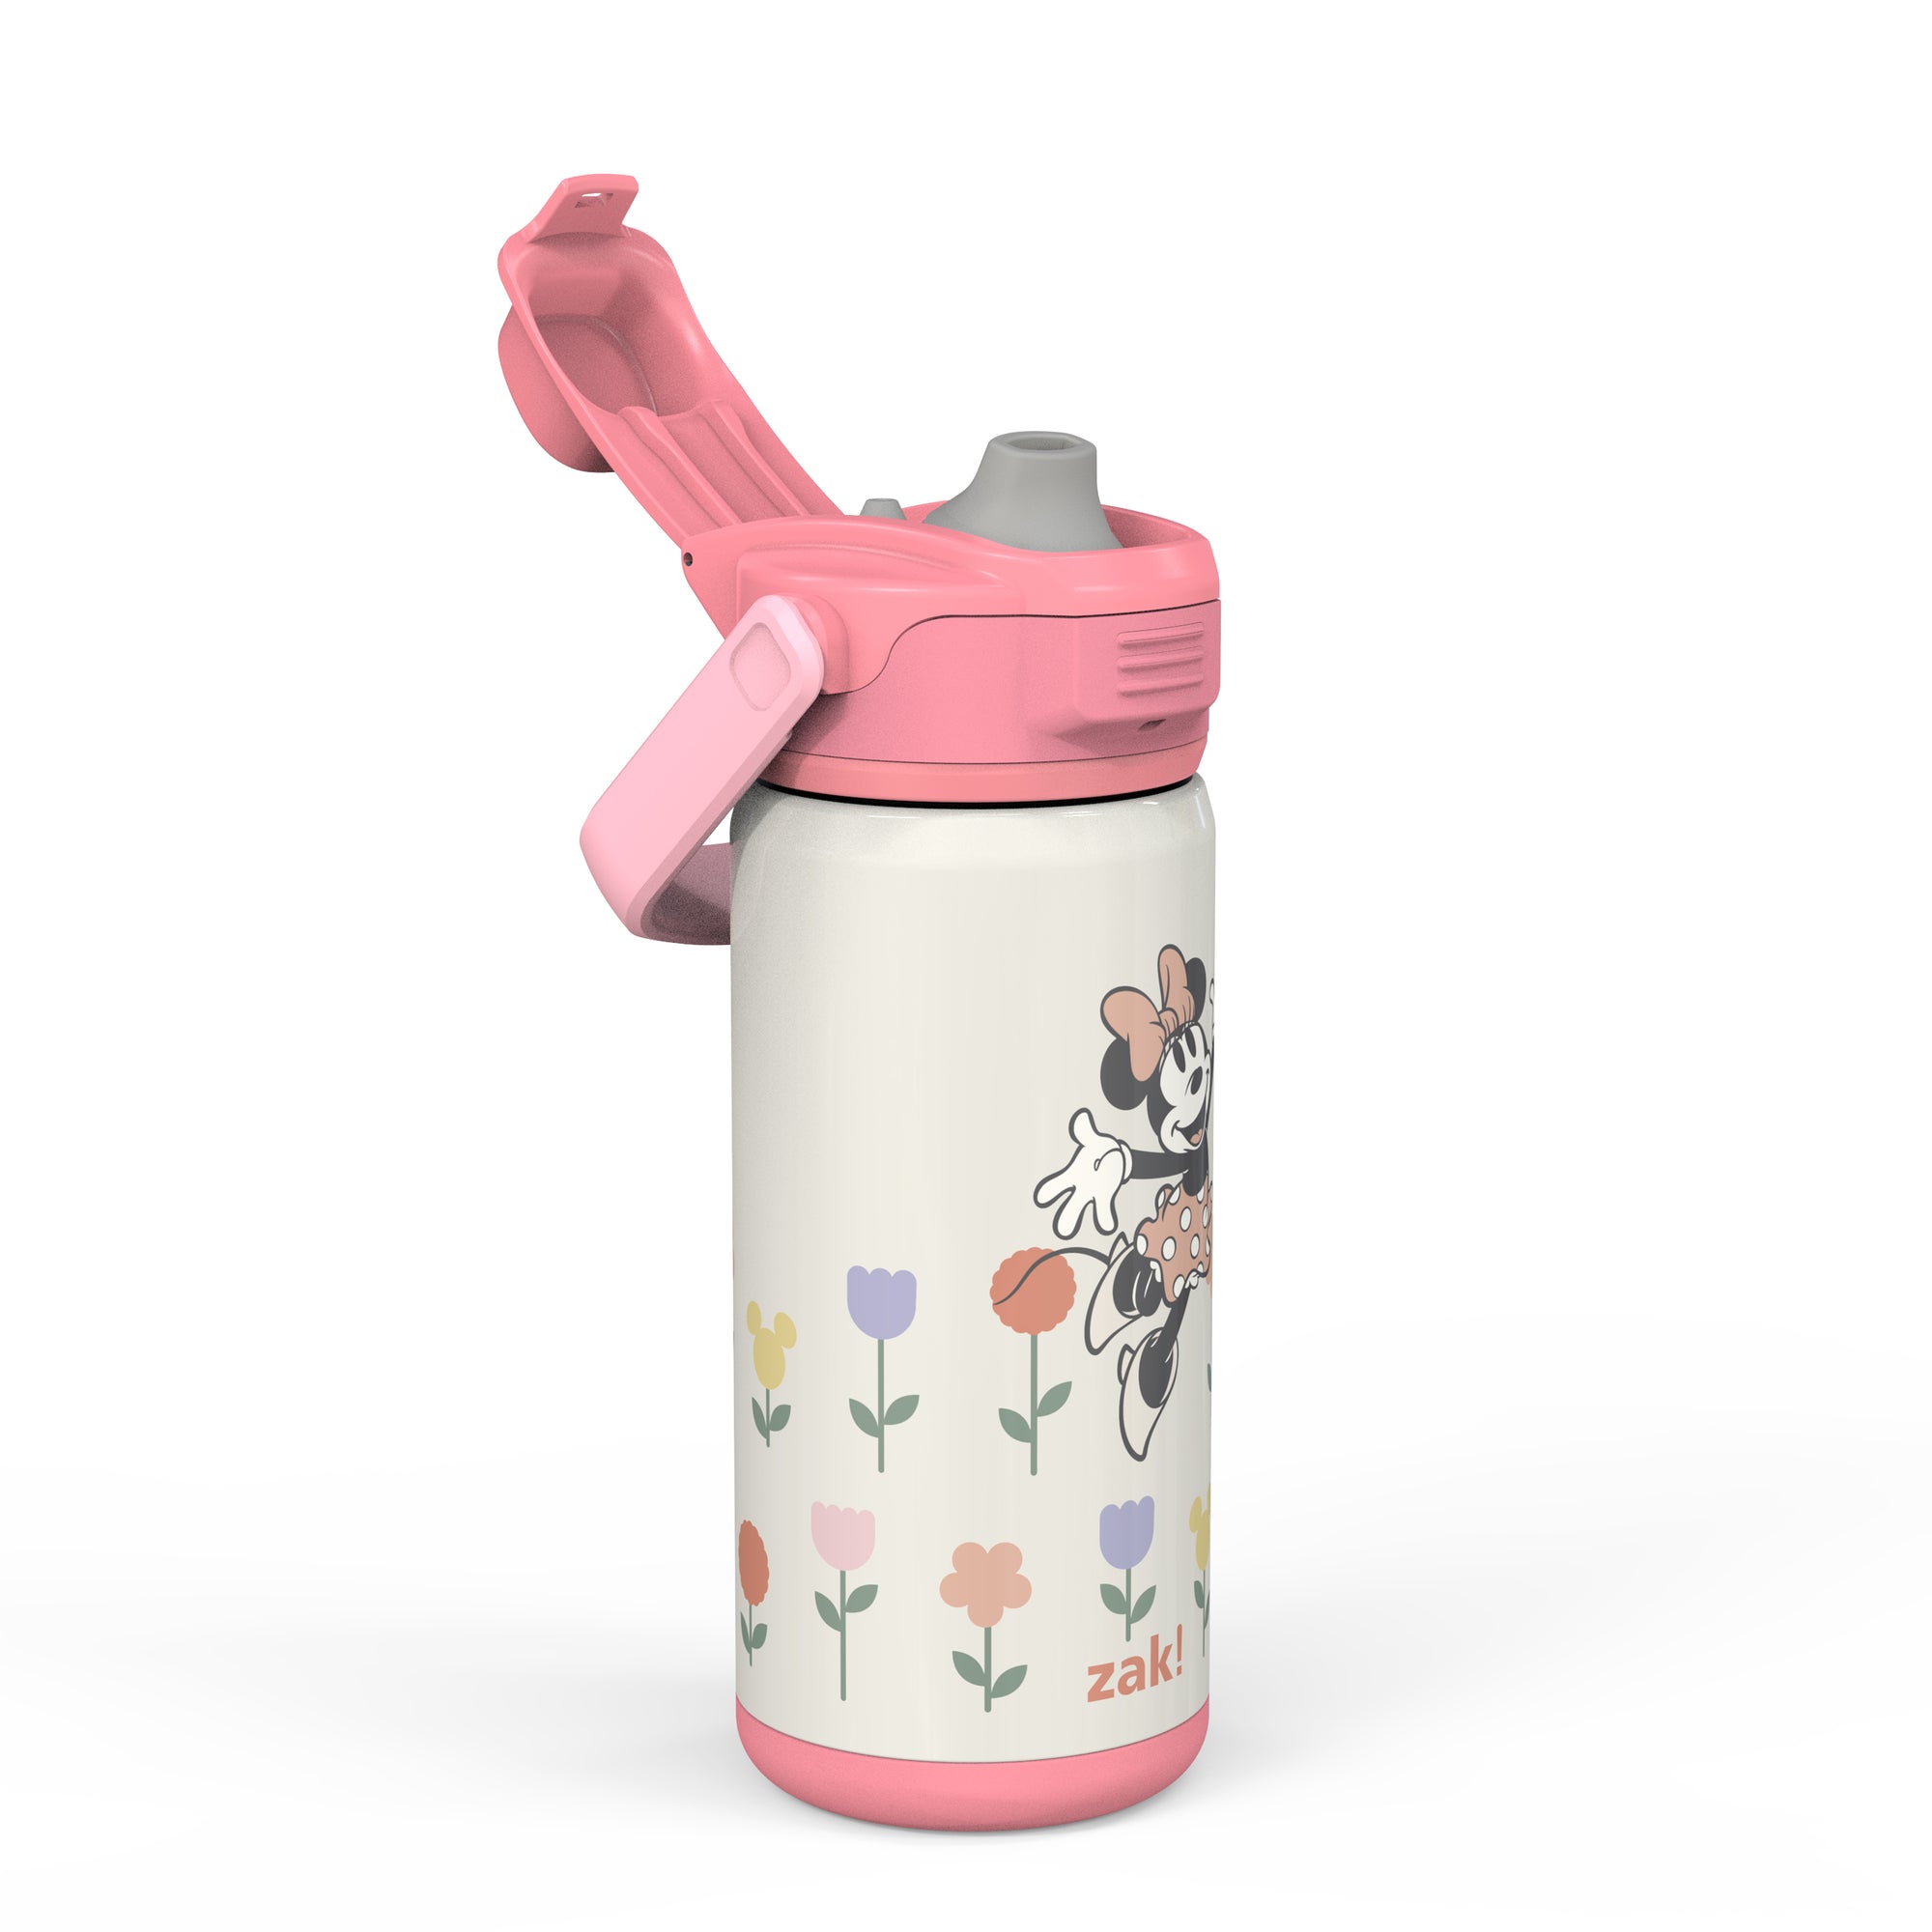 Disney Minnie Mouse Beacon Stainless Steel Insulated Kids Water Bottle with Covered Spout, 14 Ounces